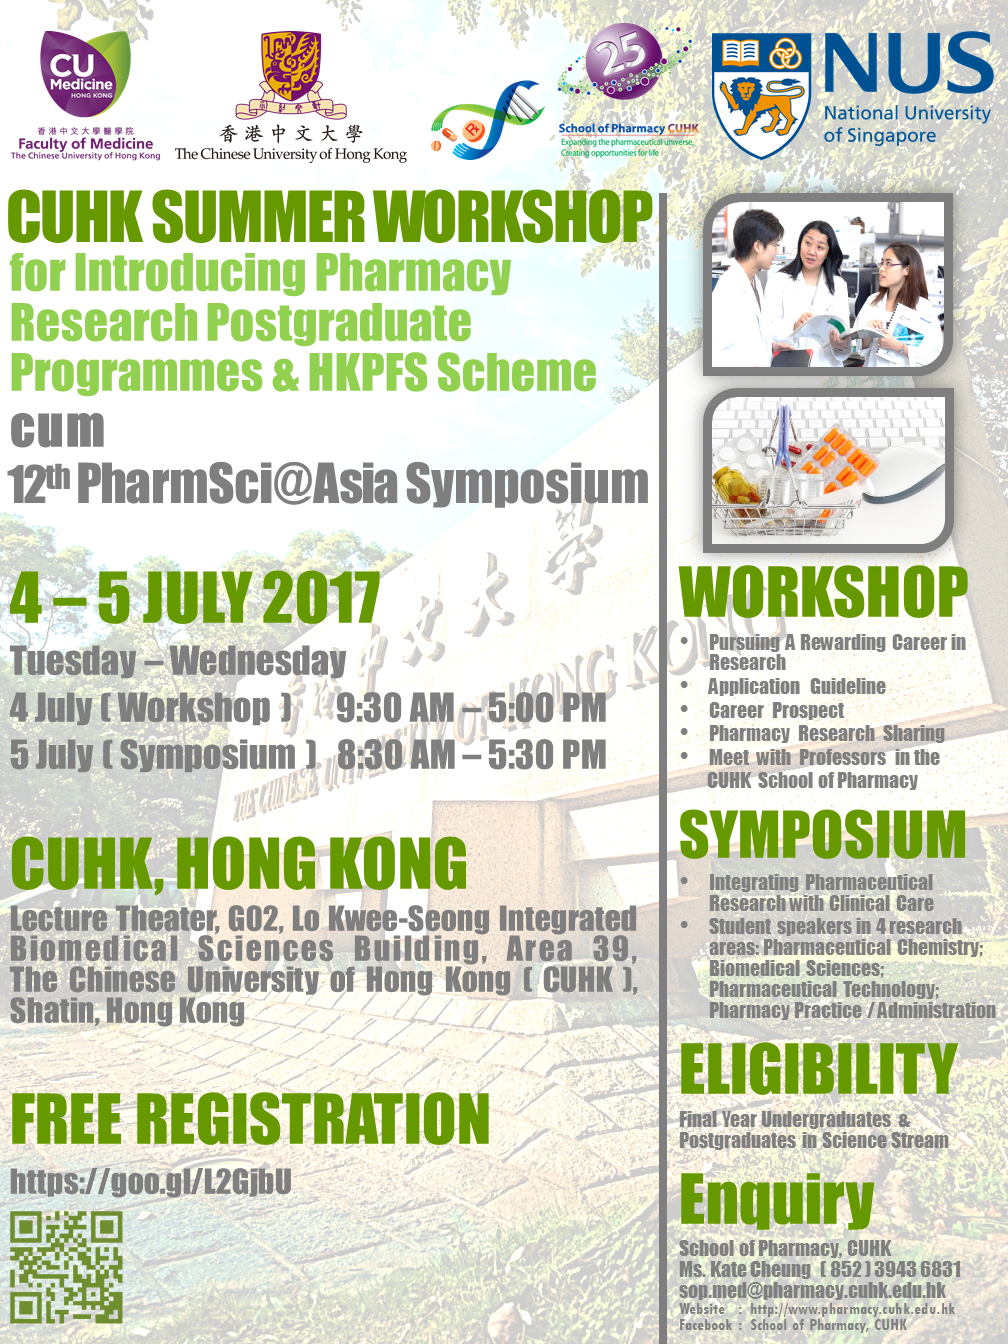 CUHK SUMMER WORKSHOP for Introducing Pharmacy Research Postgraduate Programmes & HKPFS Scheme cum 12th PharmSci@Asia Symposium @ Lecture Theater, G02, Lo Kwee-Seong Integrated Biomedical Sciences Building, Area 39, The Chinese University of Hong Kong ( CUHK ), Shatin, Hong Kong